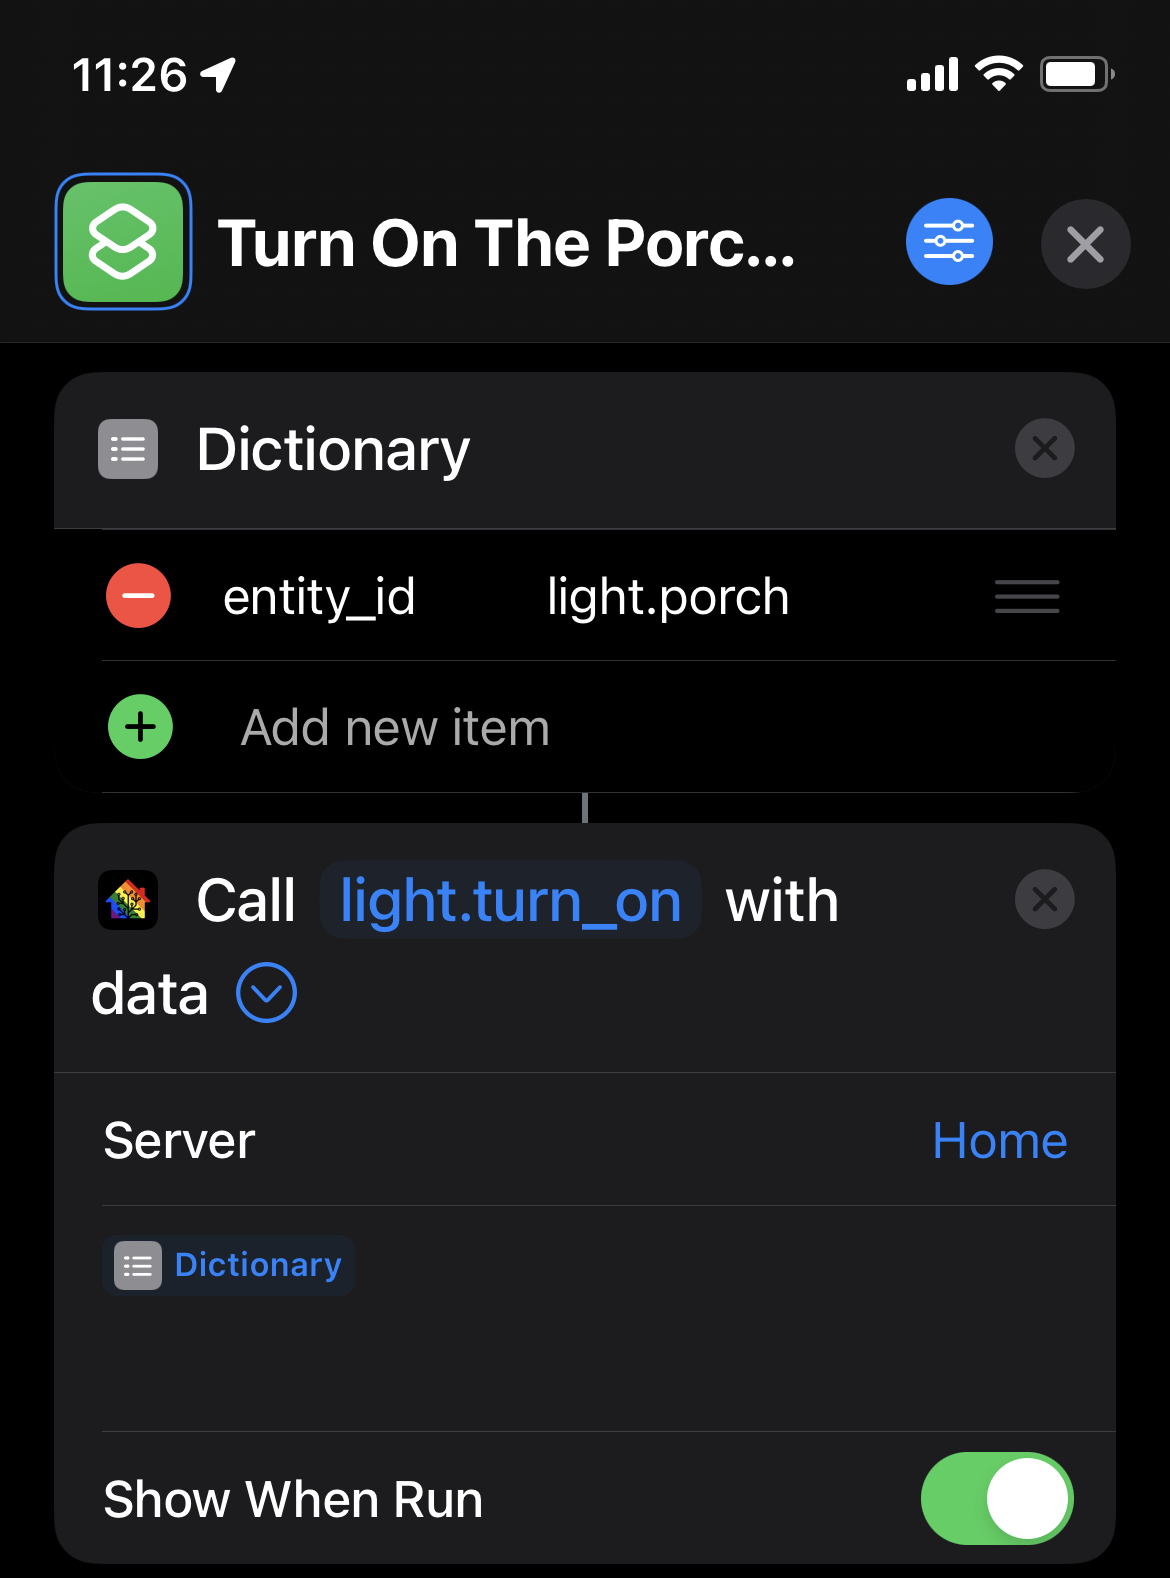 Example of a completed Siri Shortcut as described above